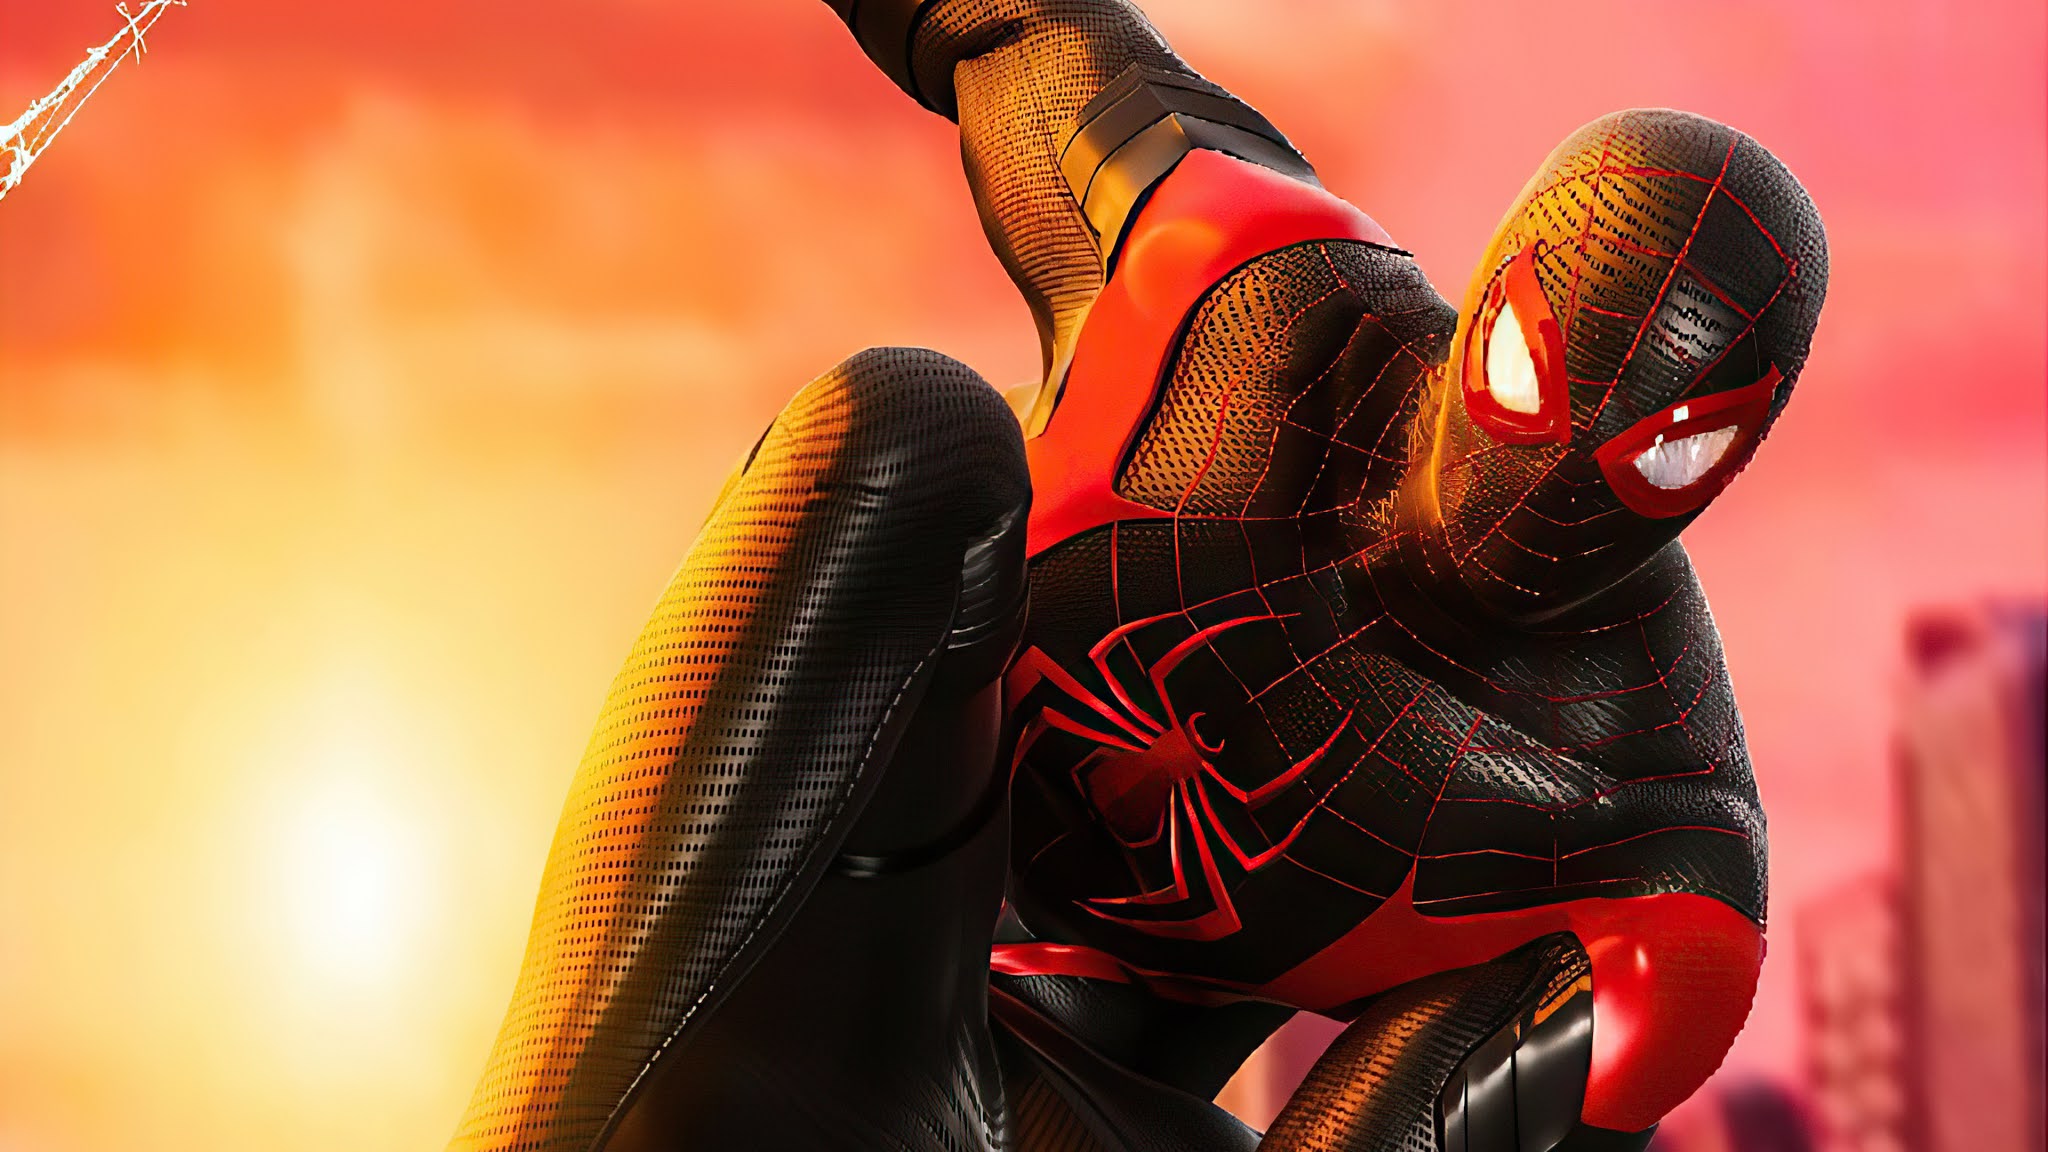 Red Spider-Man Wallpapers - Wallpaper Cave